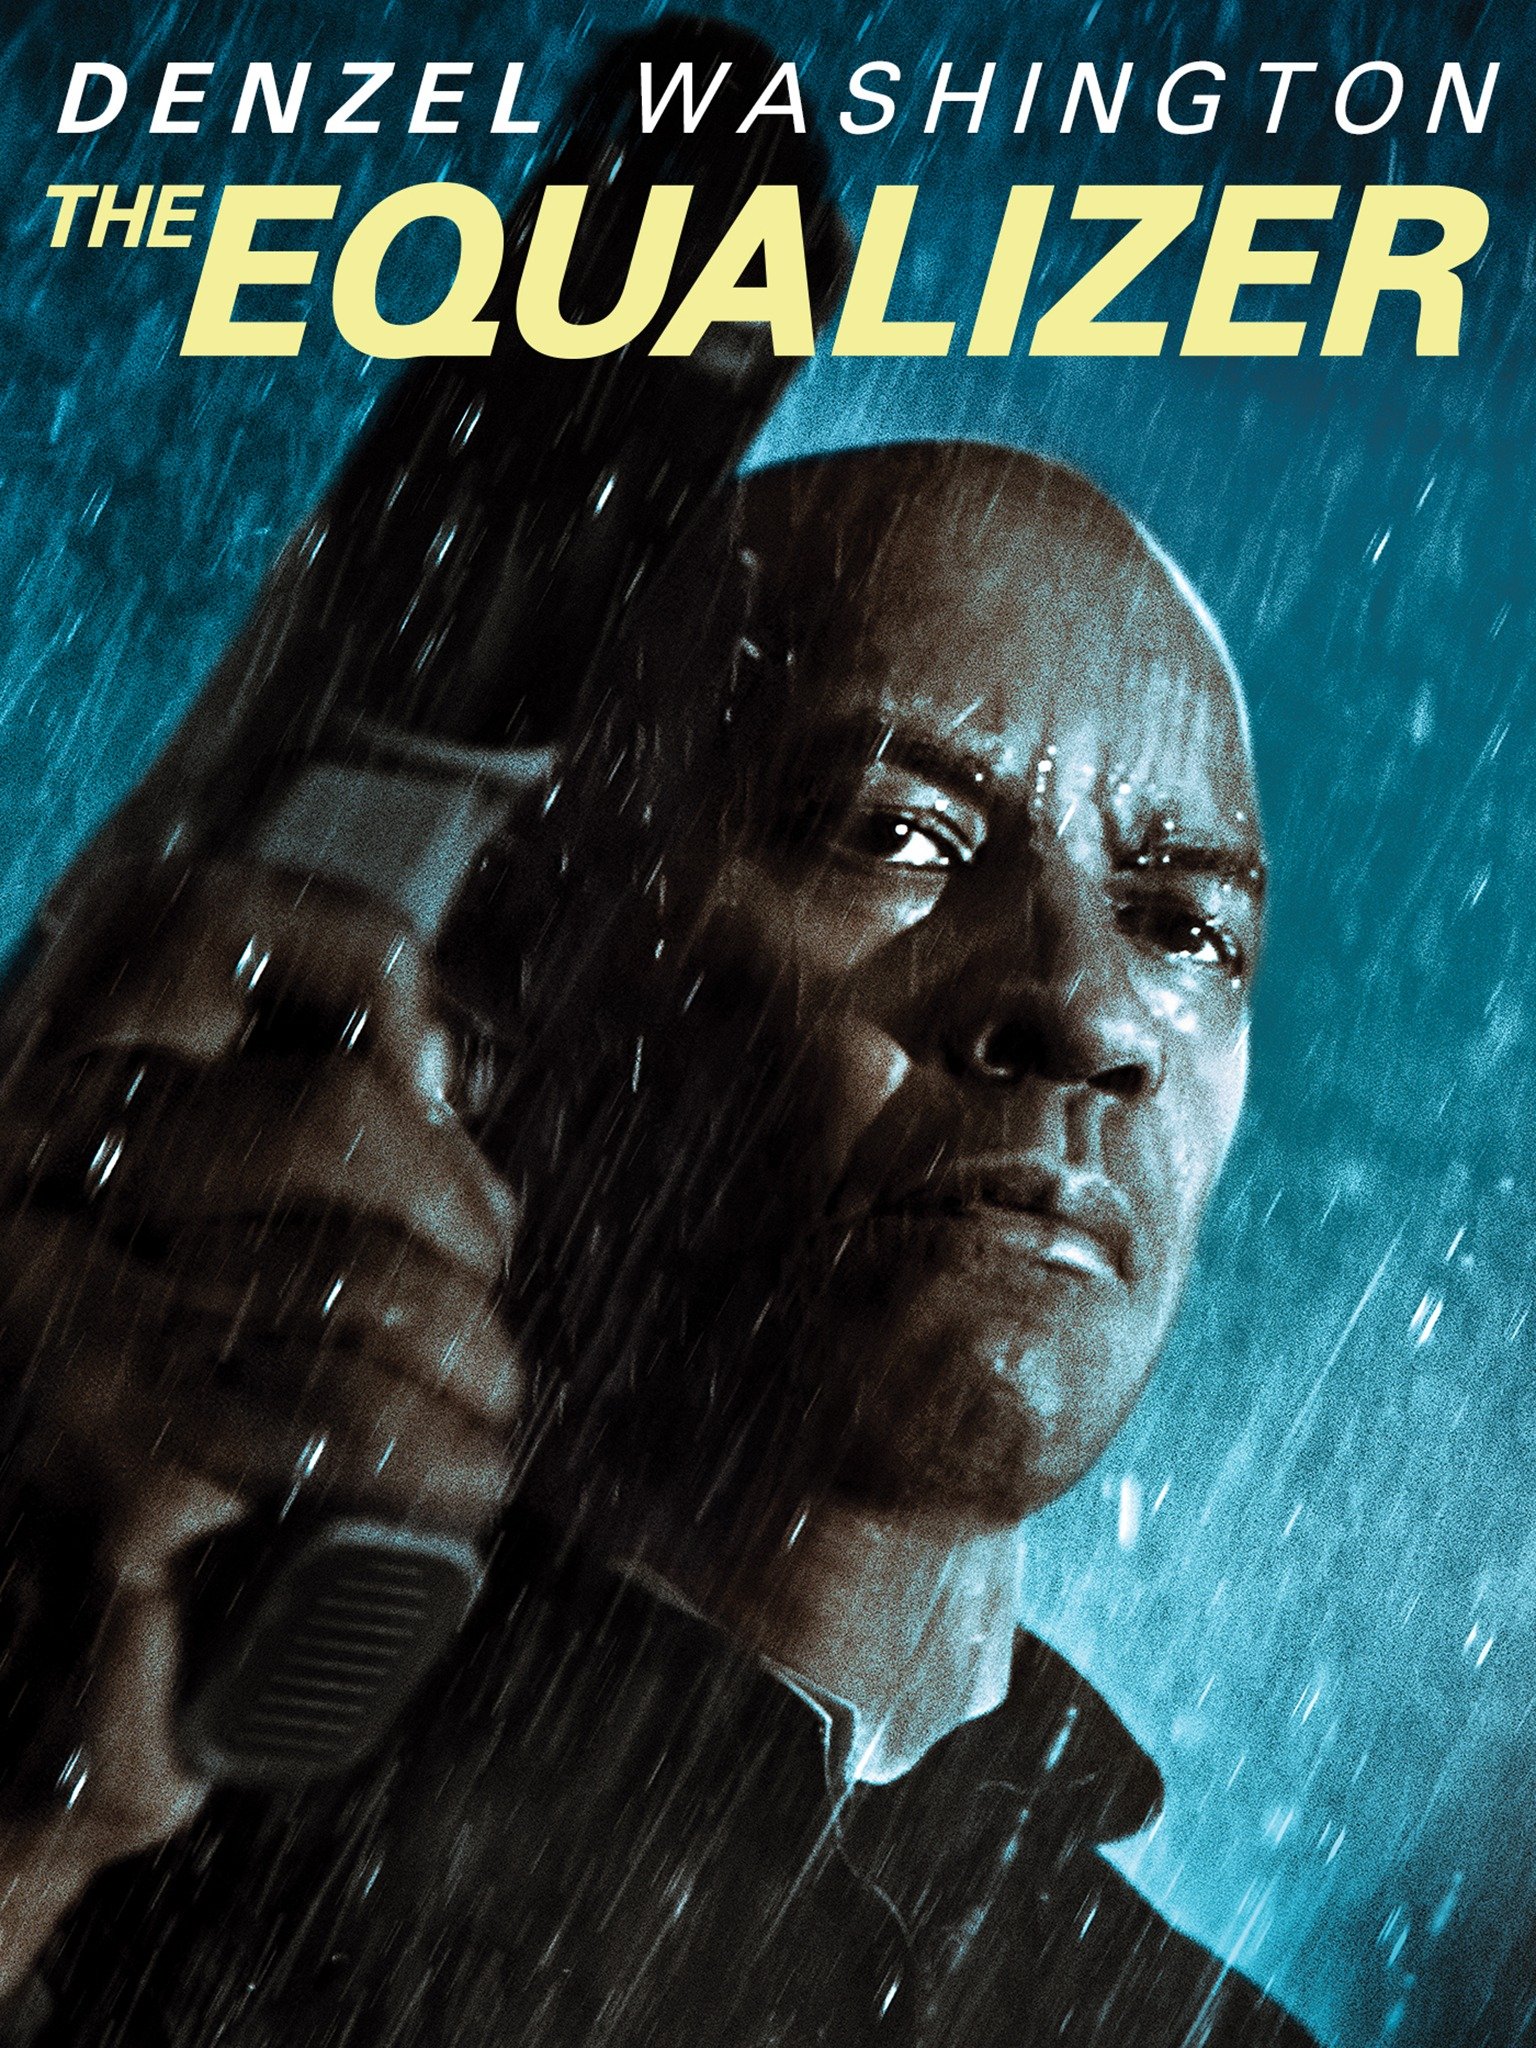 will there be an equalizer 3